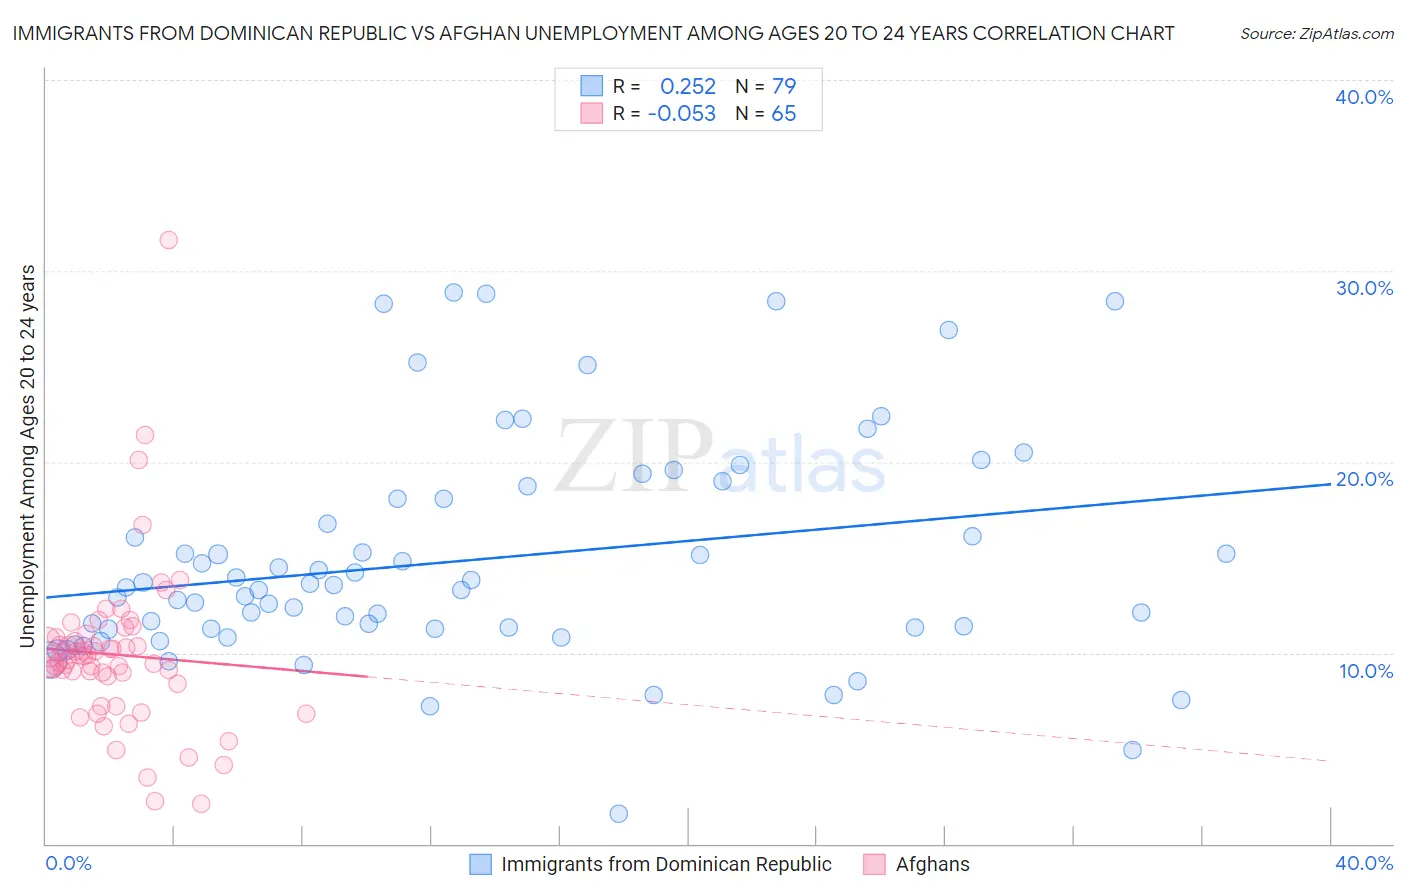 Immigrants from Dominican Republic vs Afghan Unemployment Among Ages 20 to 24 years